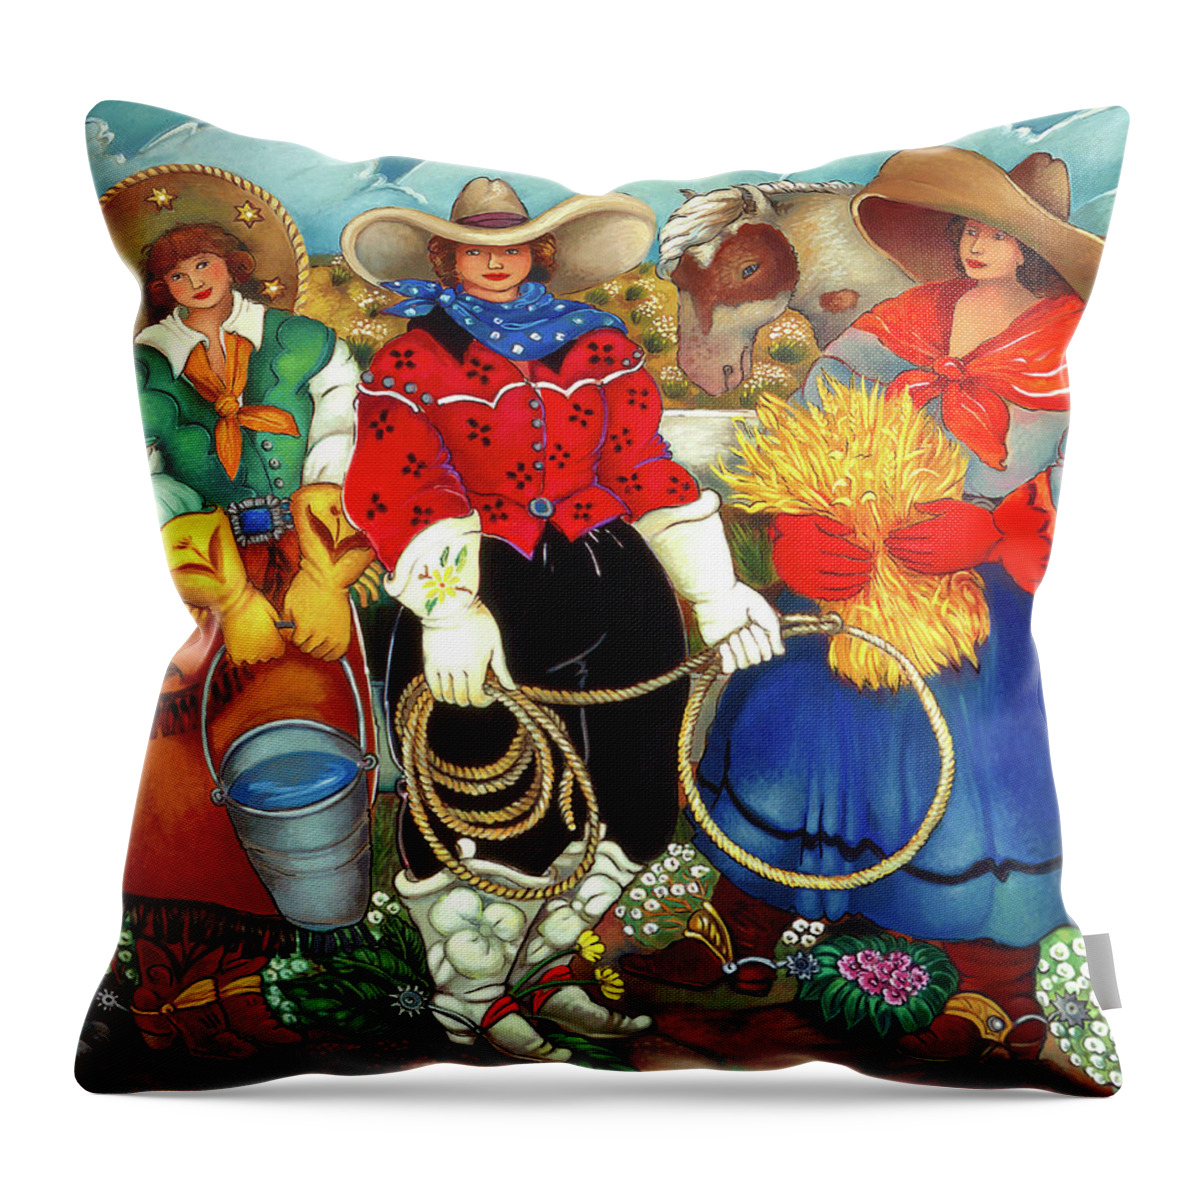 Cowgirls Throw Pillow featuring the painting Caretakers by Linda Carter Holman